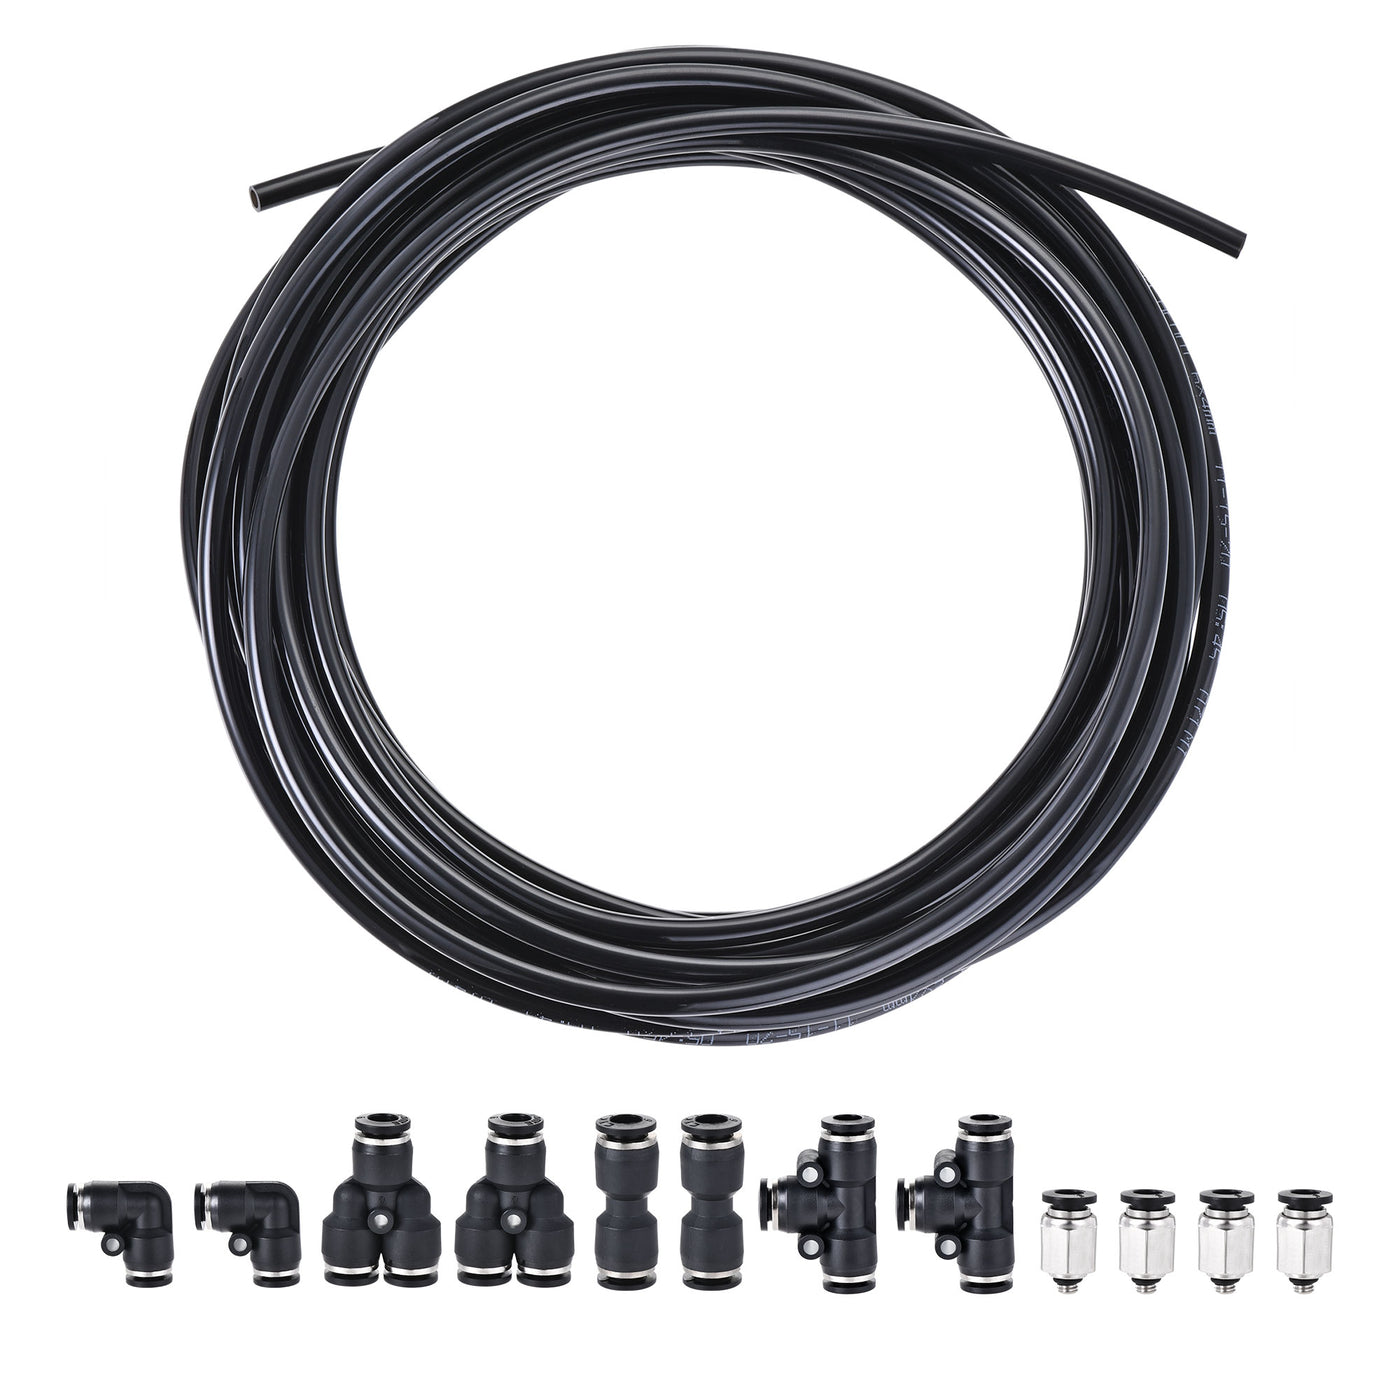 uxcell Uxcell Pneumatic 6mm OD PU Air Hose Pipe Tube Kit 10M Black with Push to Connect Fittings